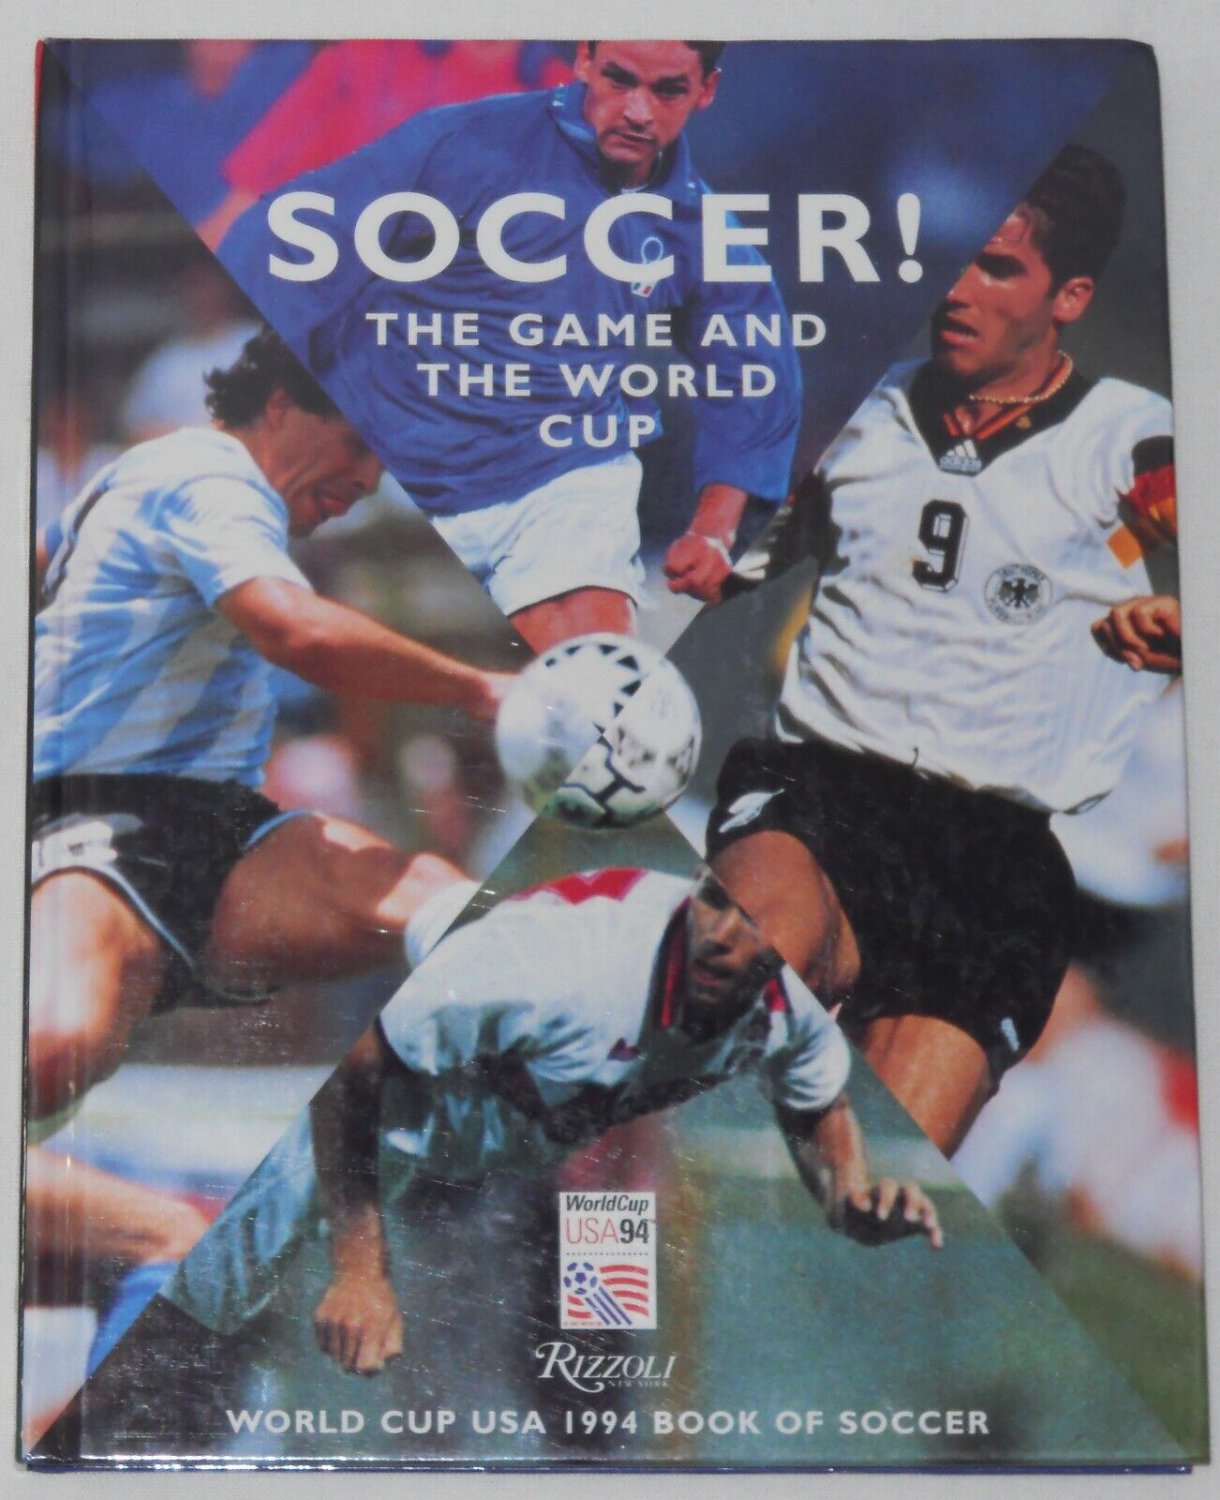 Soccer! The Game and the World Cup by Joseph S. "Sepp" Blatter (1994, Hardcover)